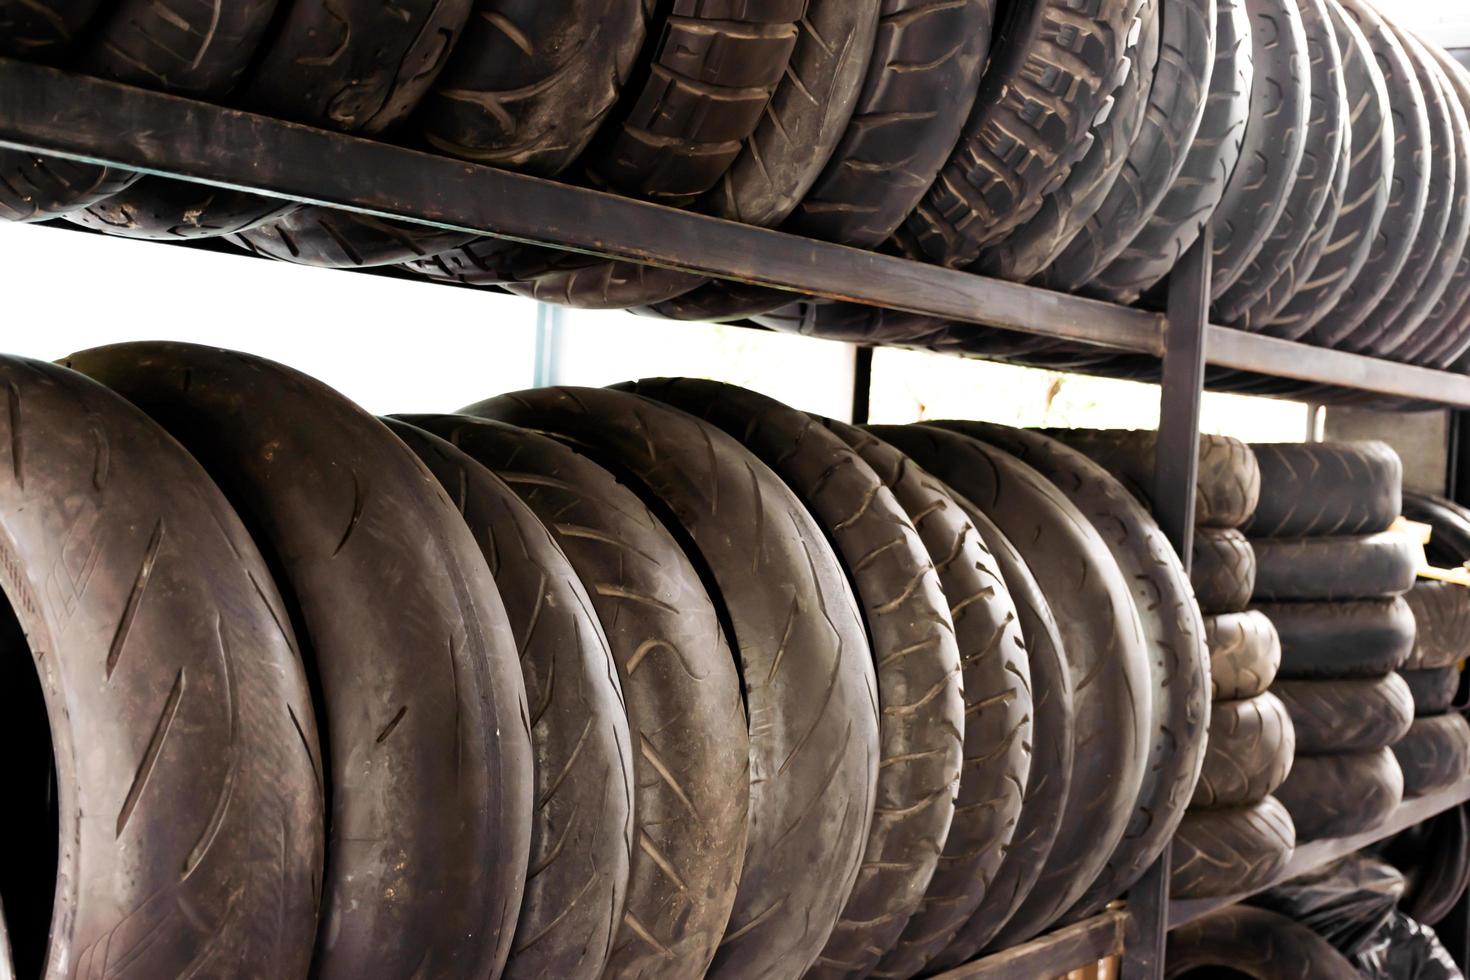 Motorcycle tire shop photo